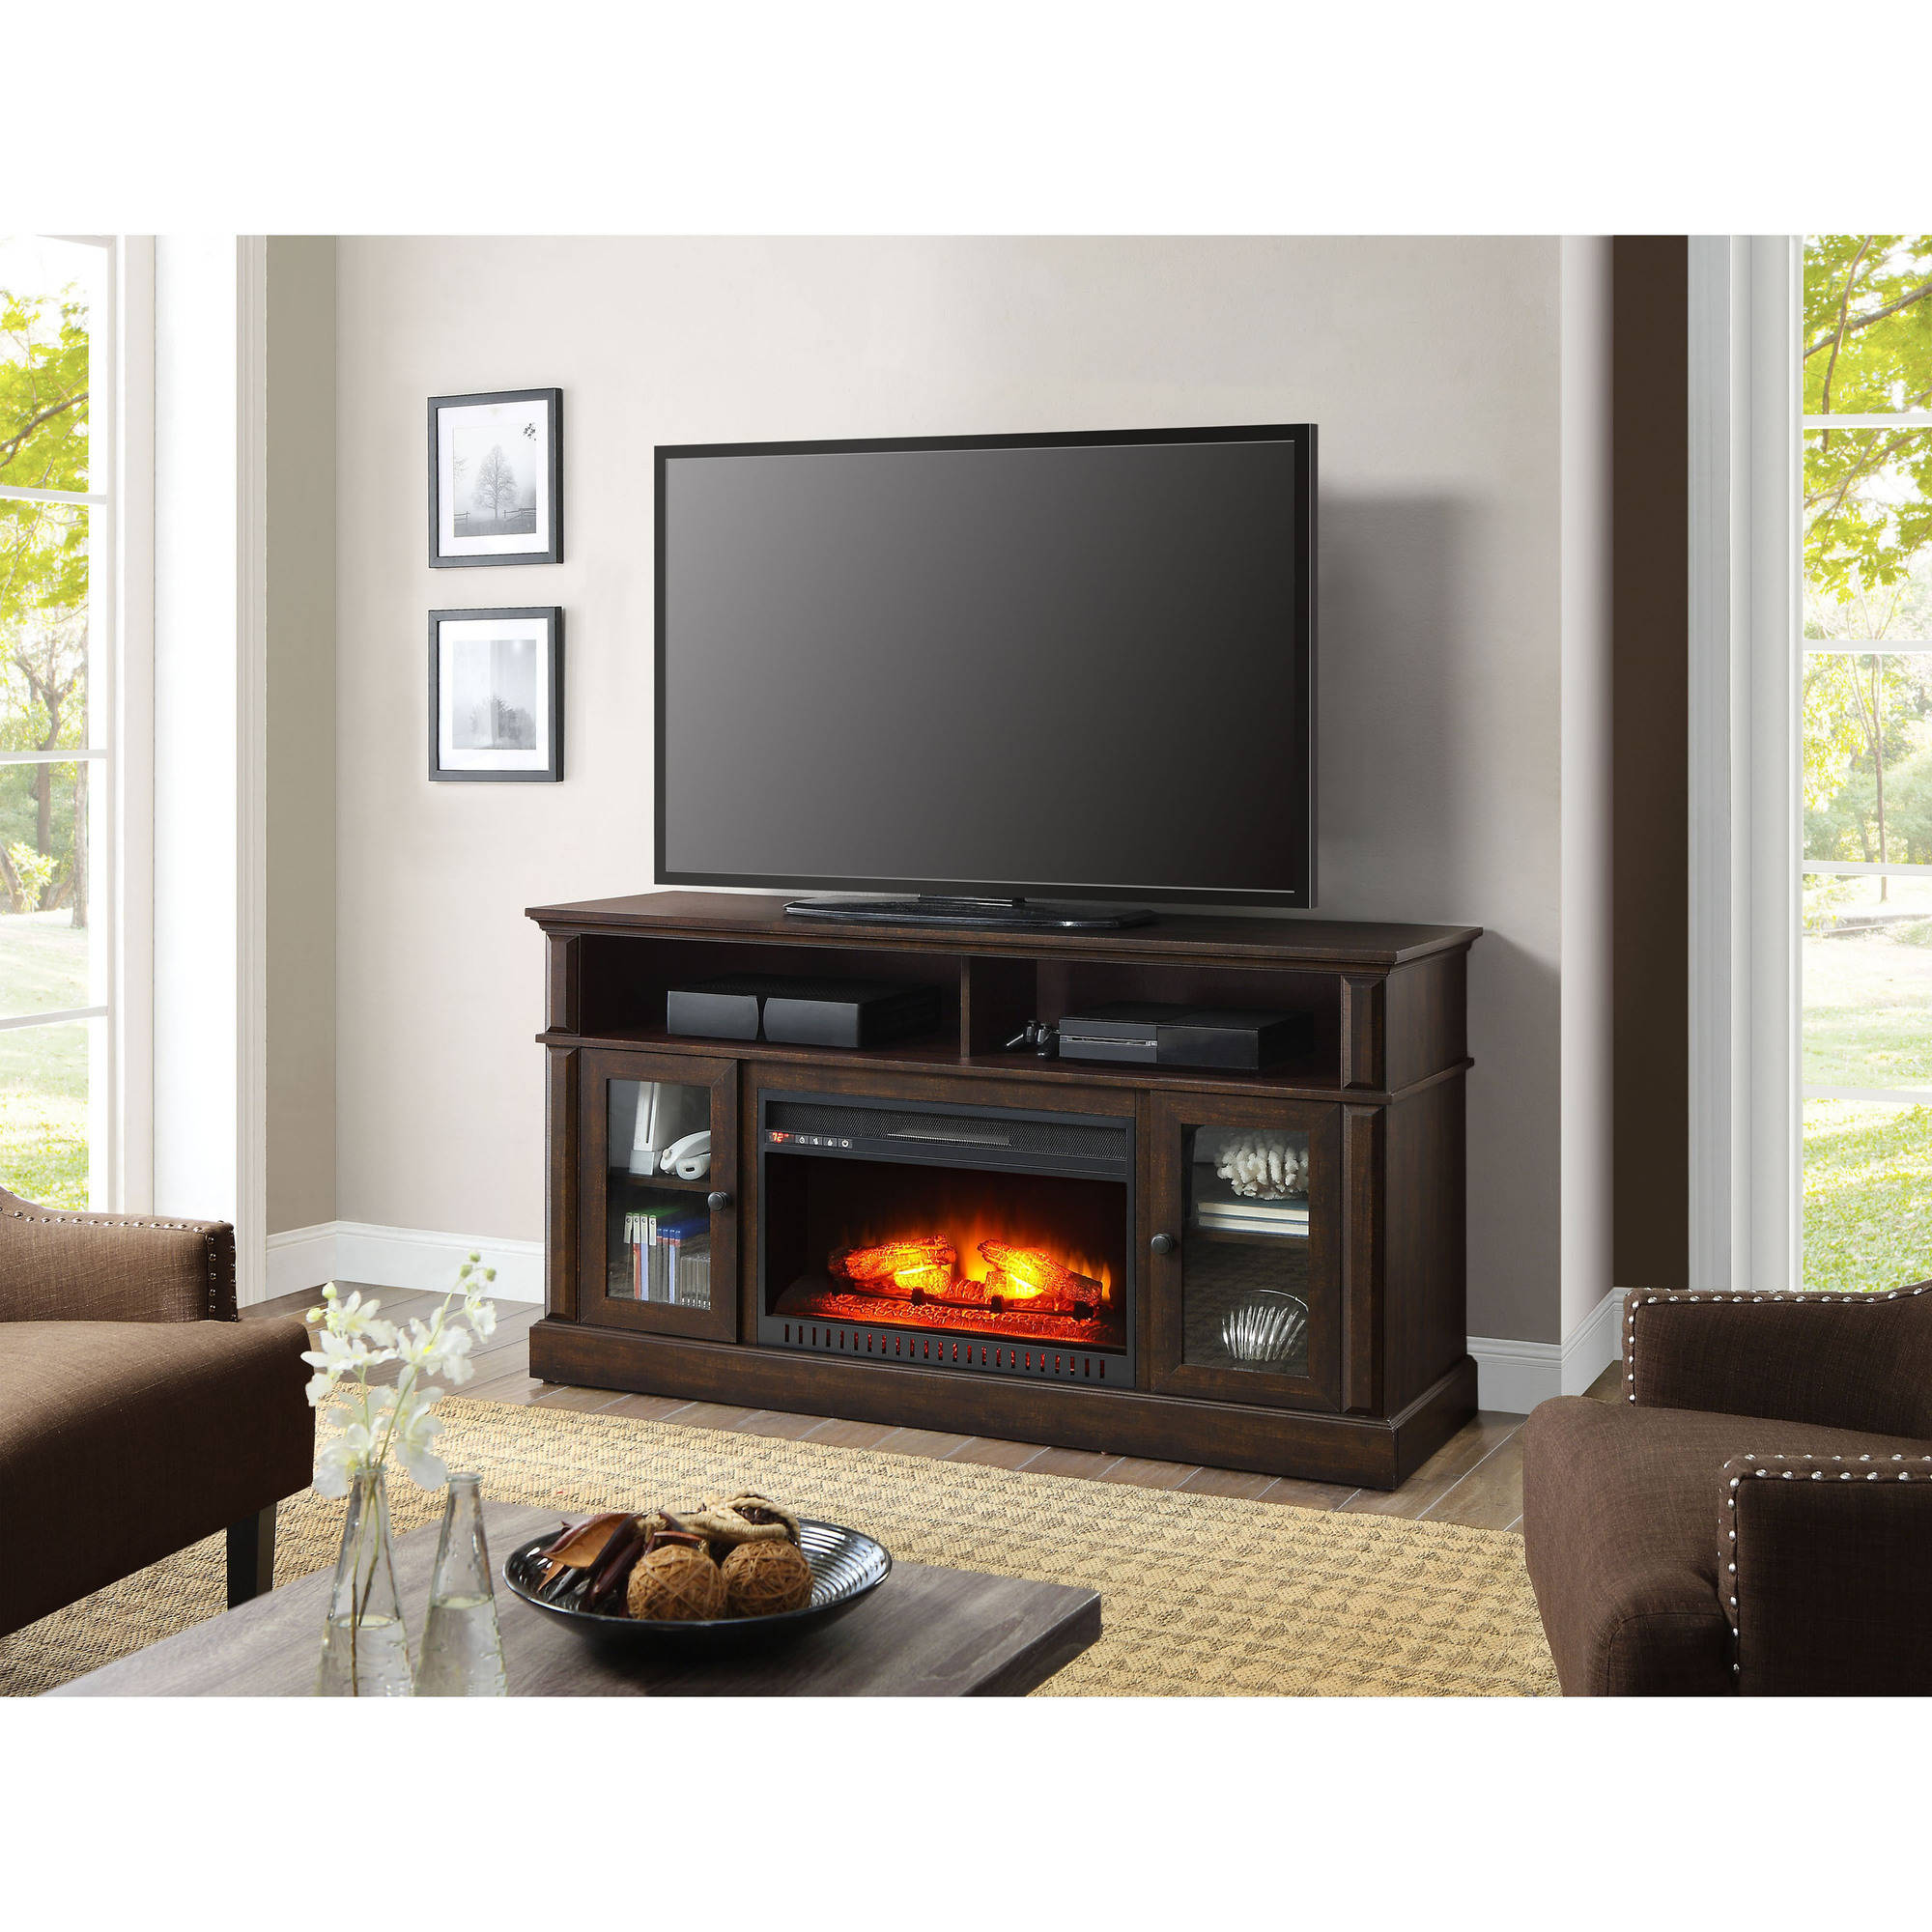 Tv Wall Unit with Fireplace Best Of Whalen Barston Media Fireplace for Tv S Up to 70 Multiple